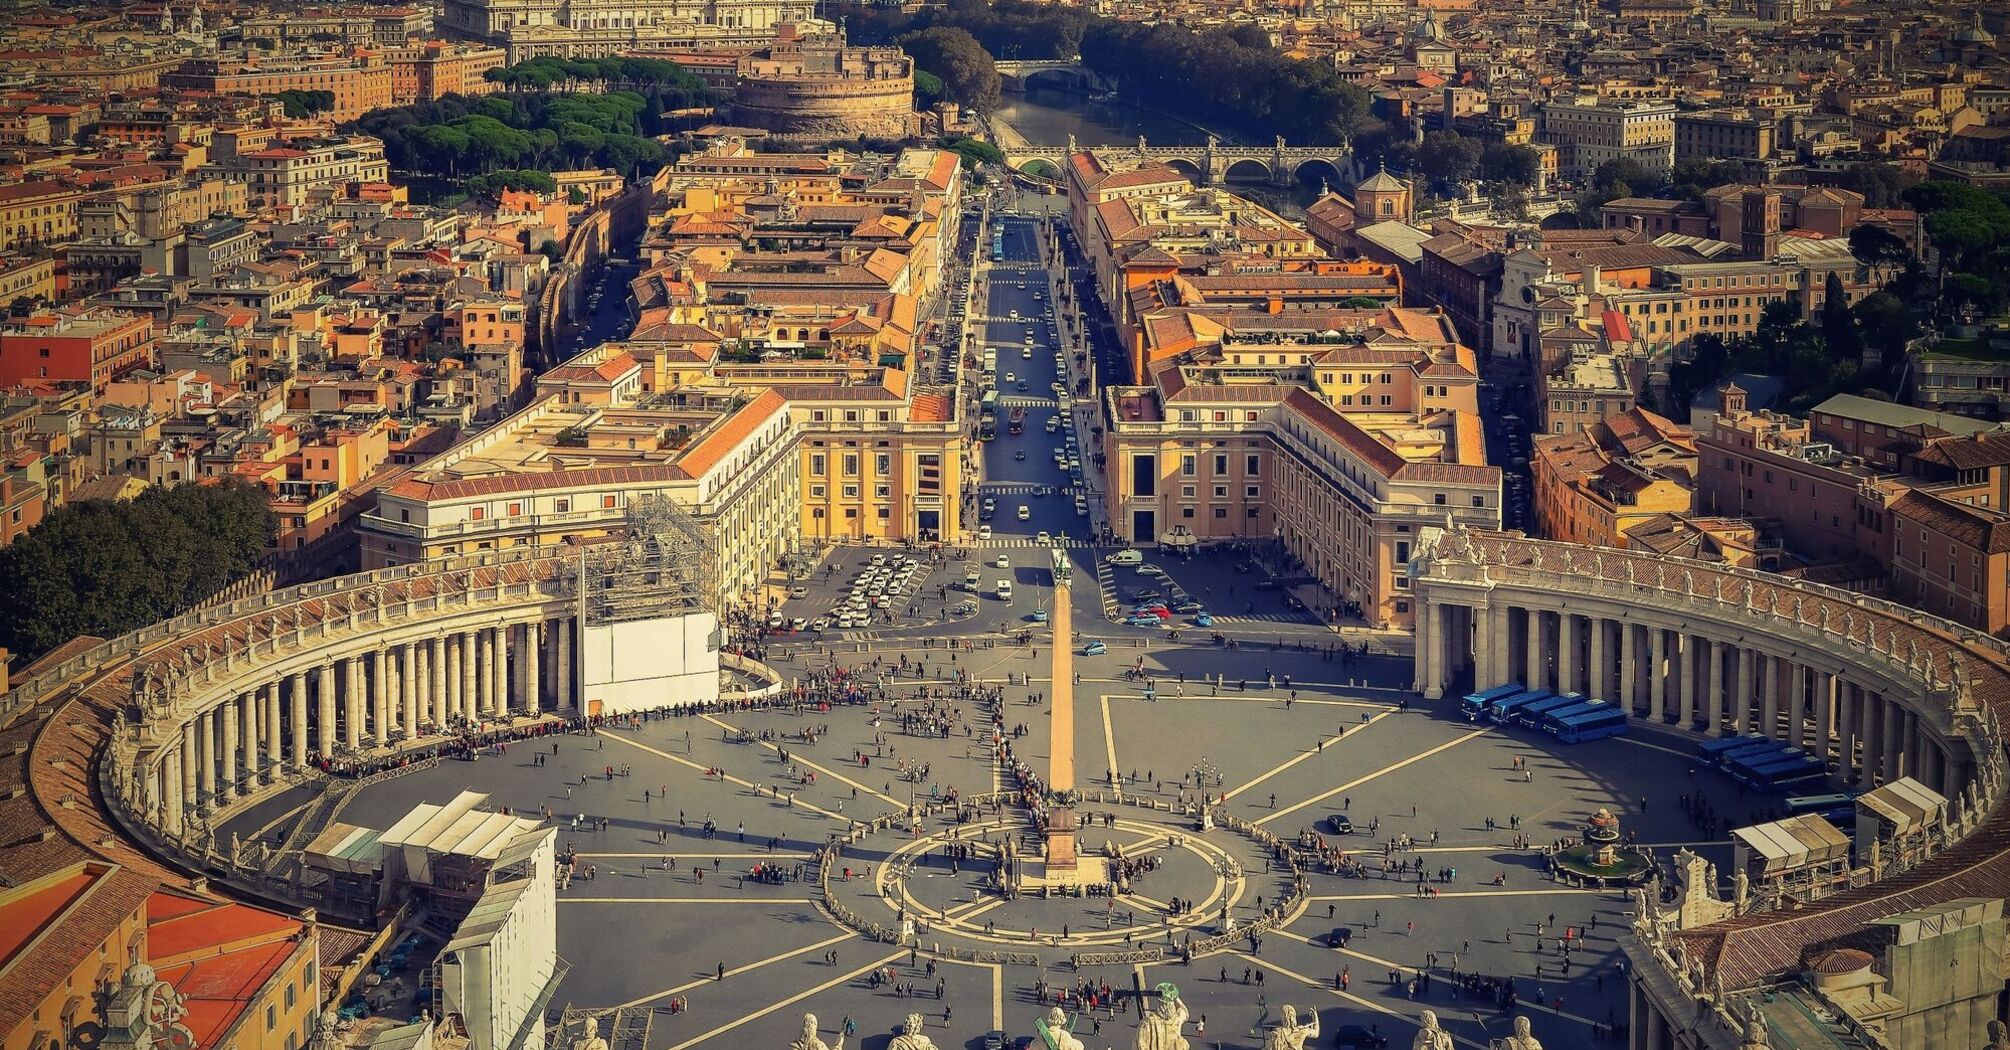 List of souvenirs you should definitely bring from the Vatican